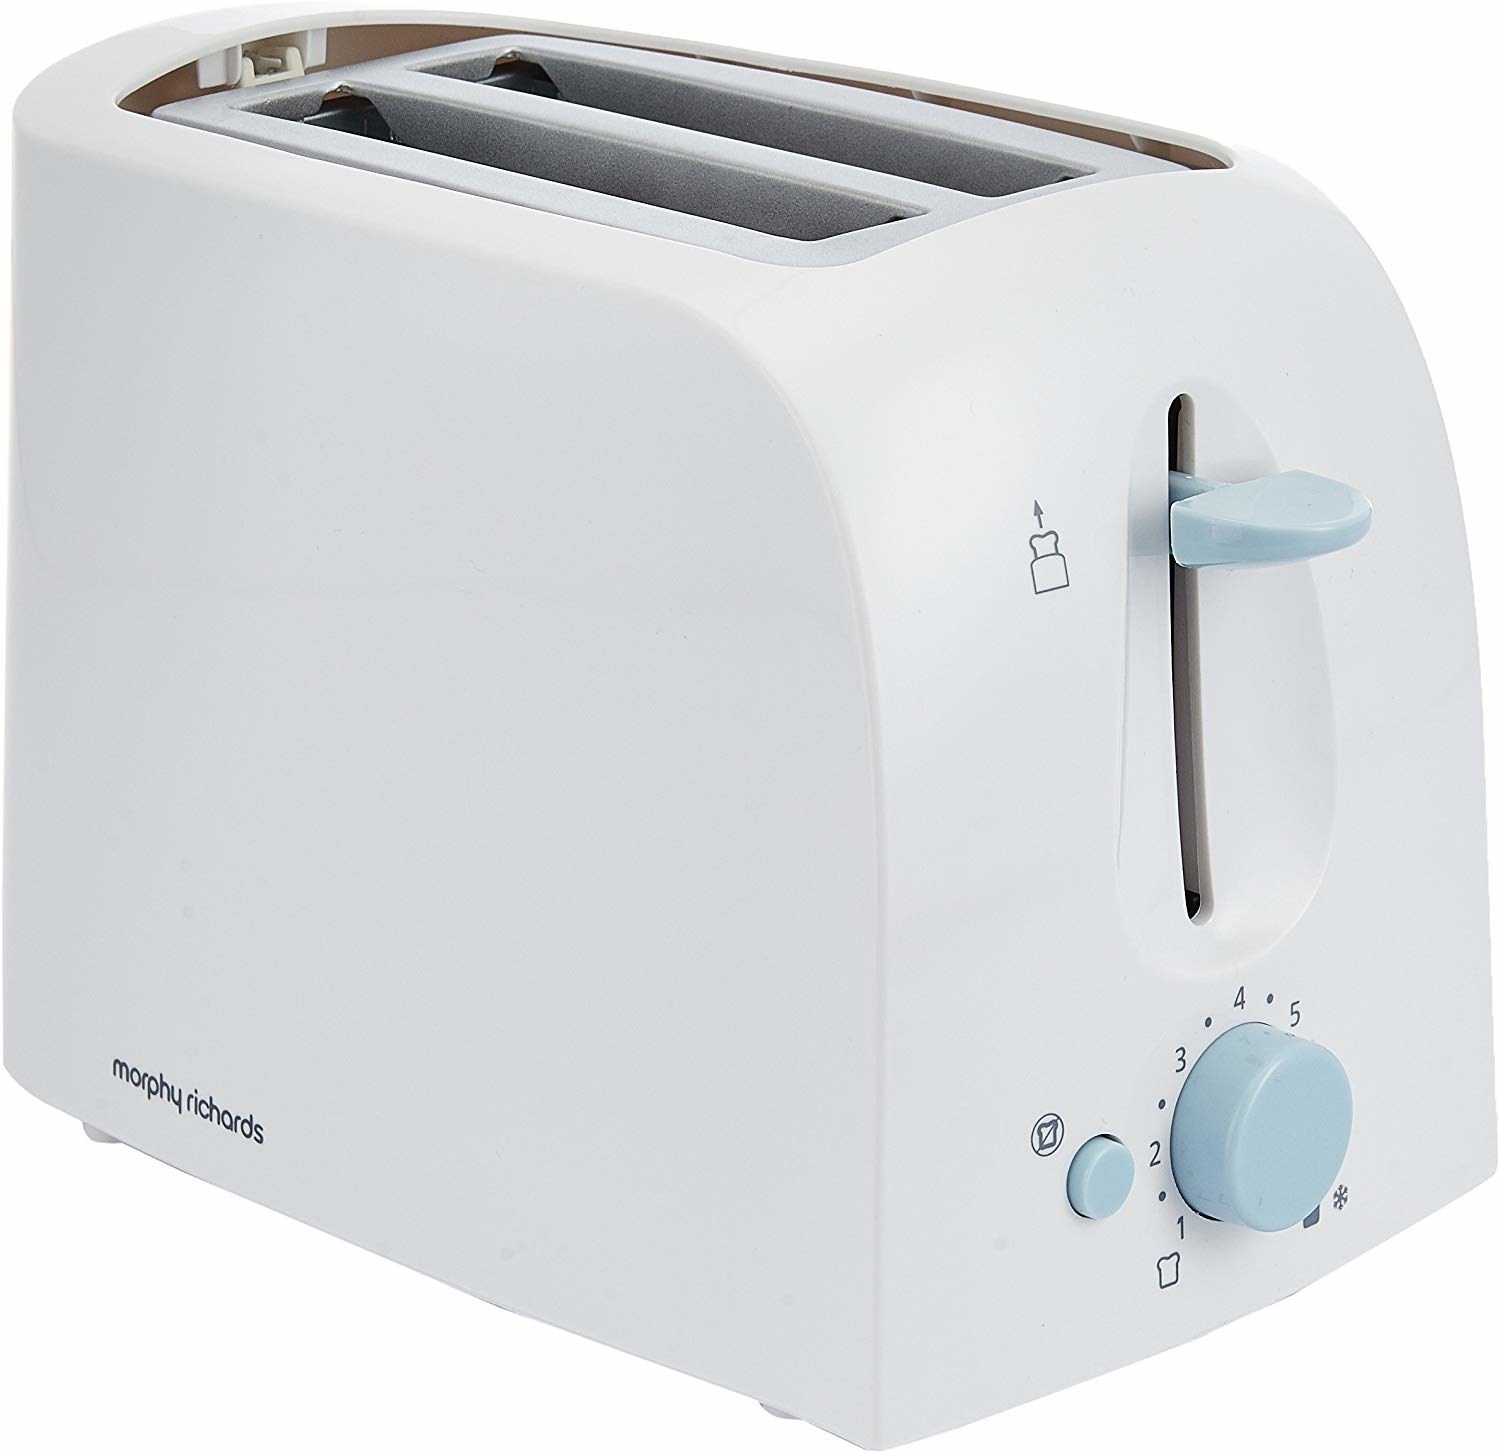 A Morphy Richards toaster in white.